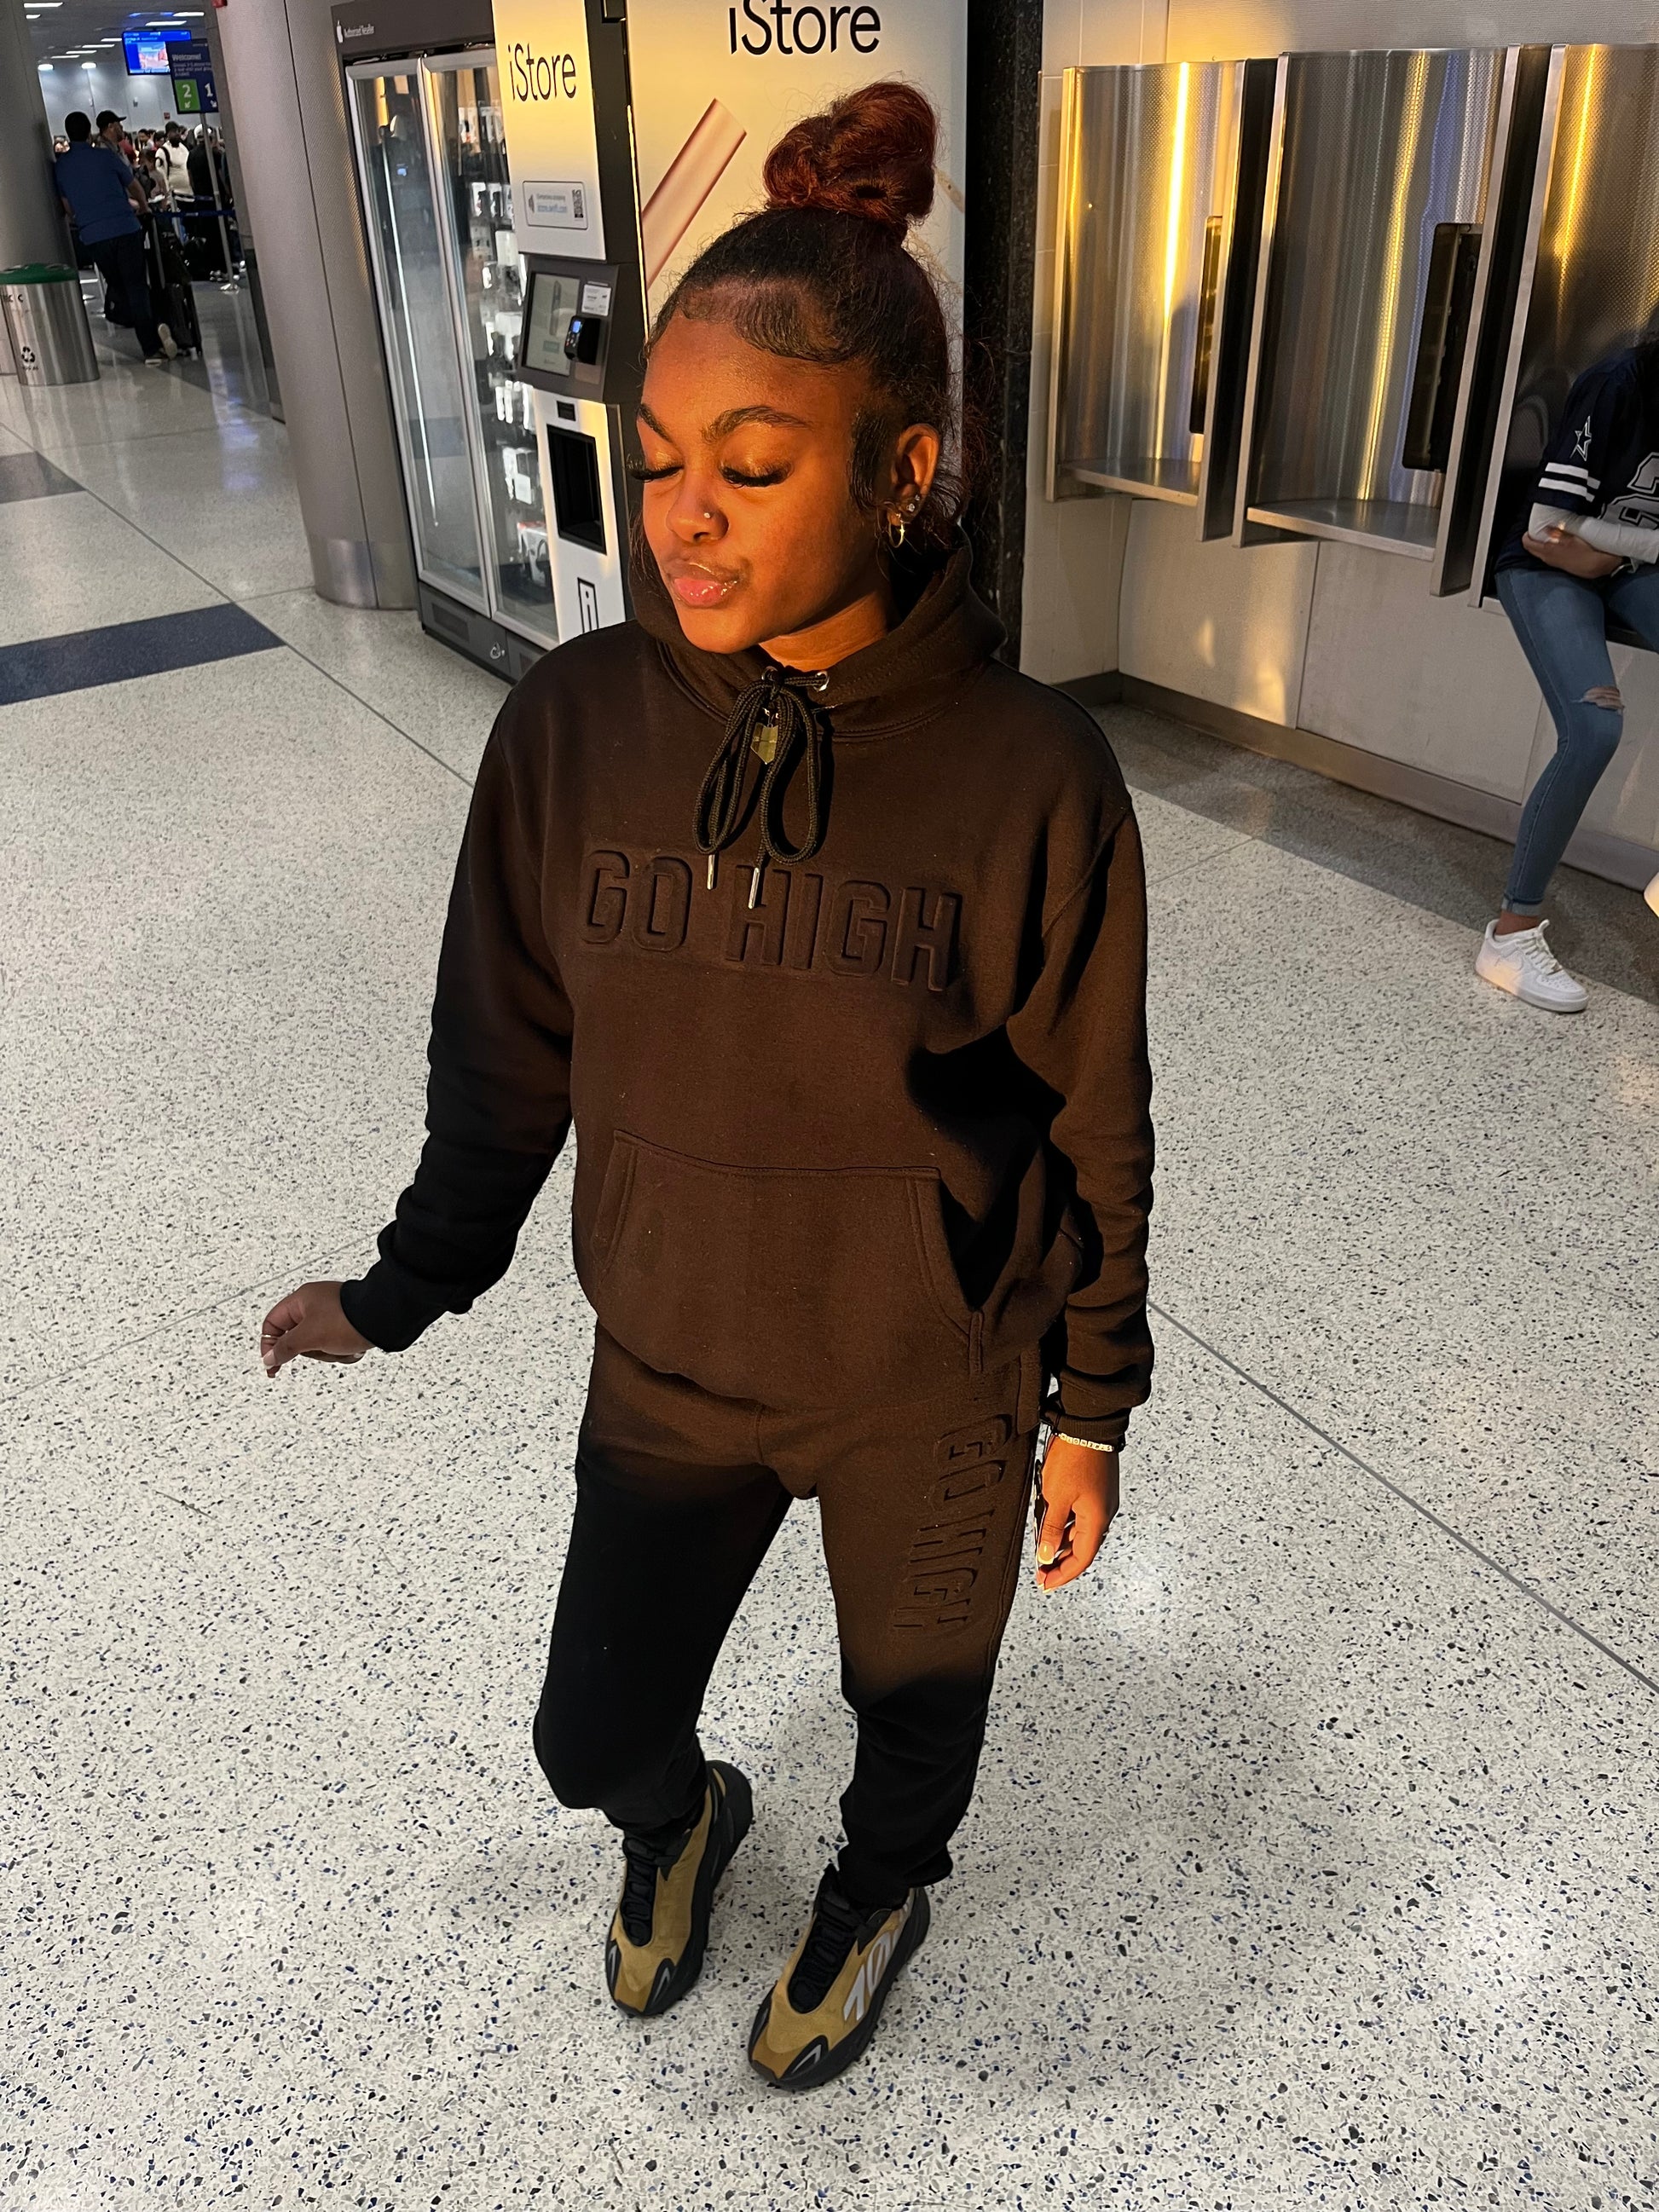 Blacked Out Apparel Women's Sweatsuits – Blacked out apparel